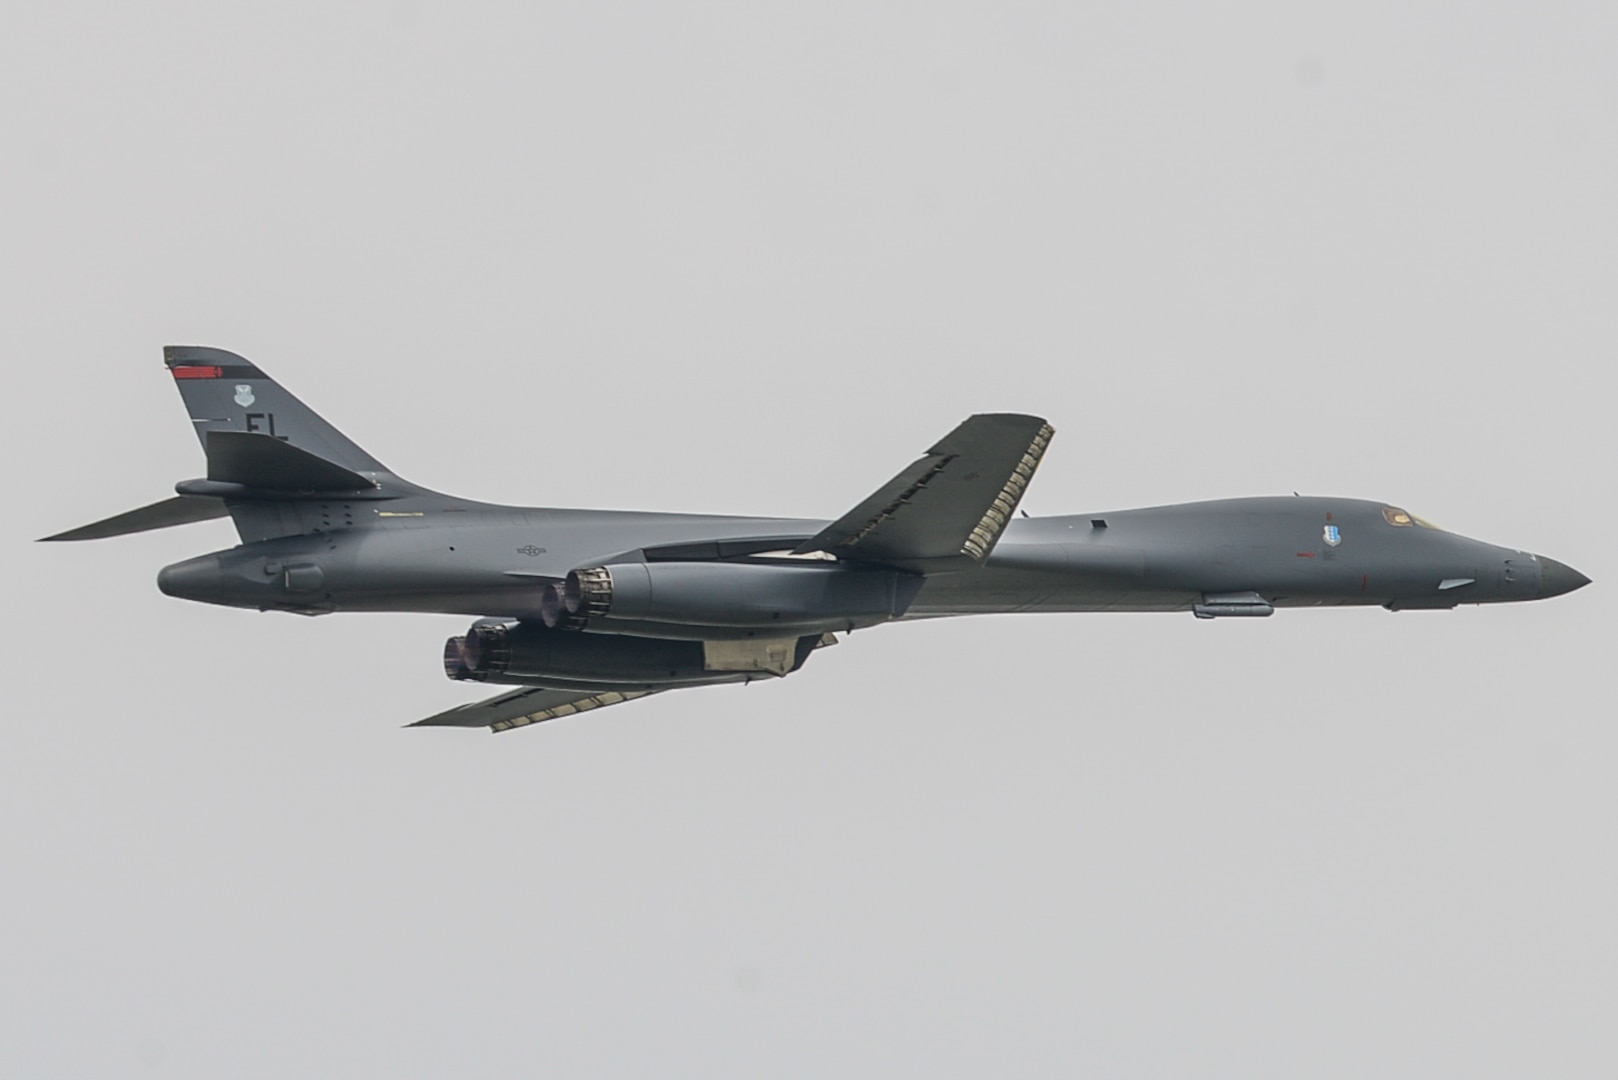 A B-1B Lancer assigned to Andersen Air Base, Guam, performs a low level flight over Osan Air Base, Republic of Korea, Sept. 21, 2016. The B-1 is the backbone of the U.S. long-range bomber mission and is capable of carrying the largest payload of both guided and unguided weapons in the Air Force inventory. The flight was the closest a B-1 has ever flown to the border between the Republic of Korea and North Korea. (U.S. Air Force photo by Senior Airman Dillian Bamman)